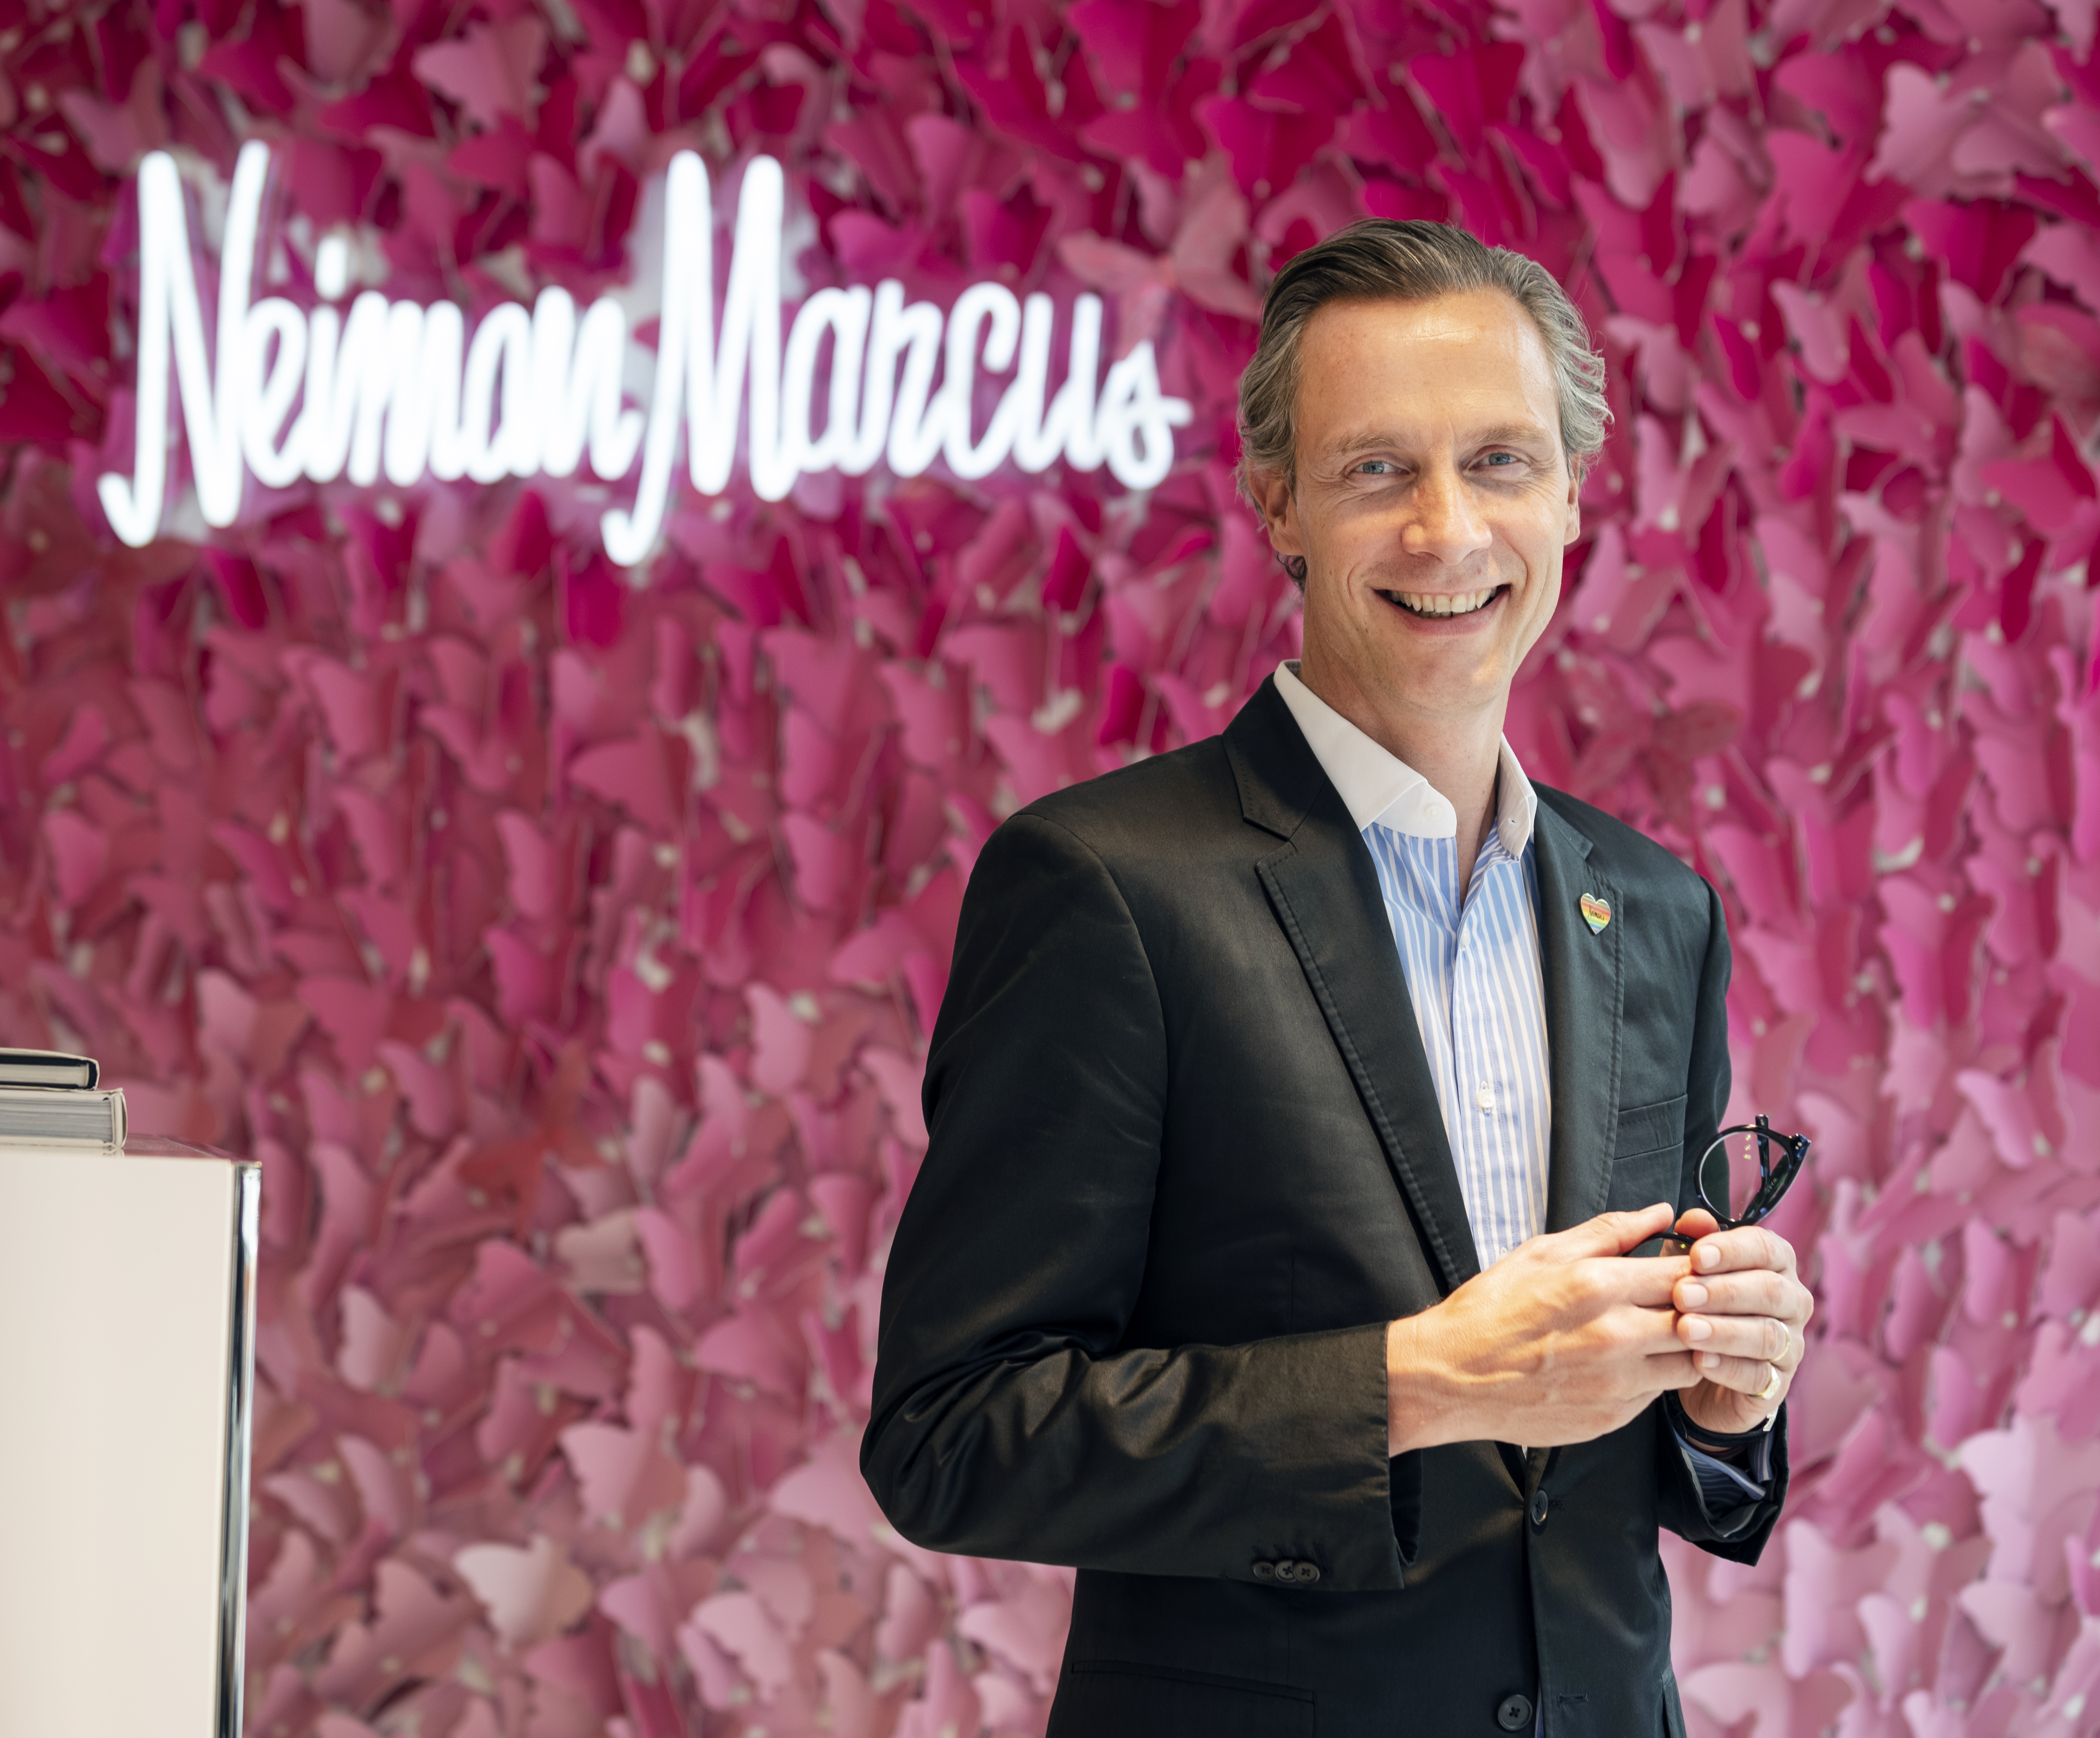 Neiman Marcus CEO says he only wants 'Rich' people shopping at stores, amid  layoffs : r/RetailNews